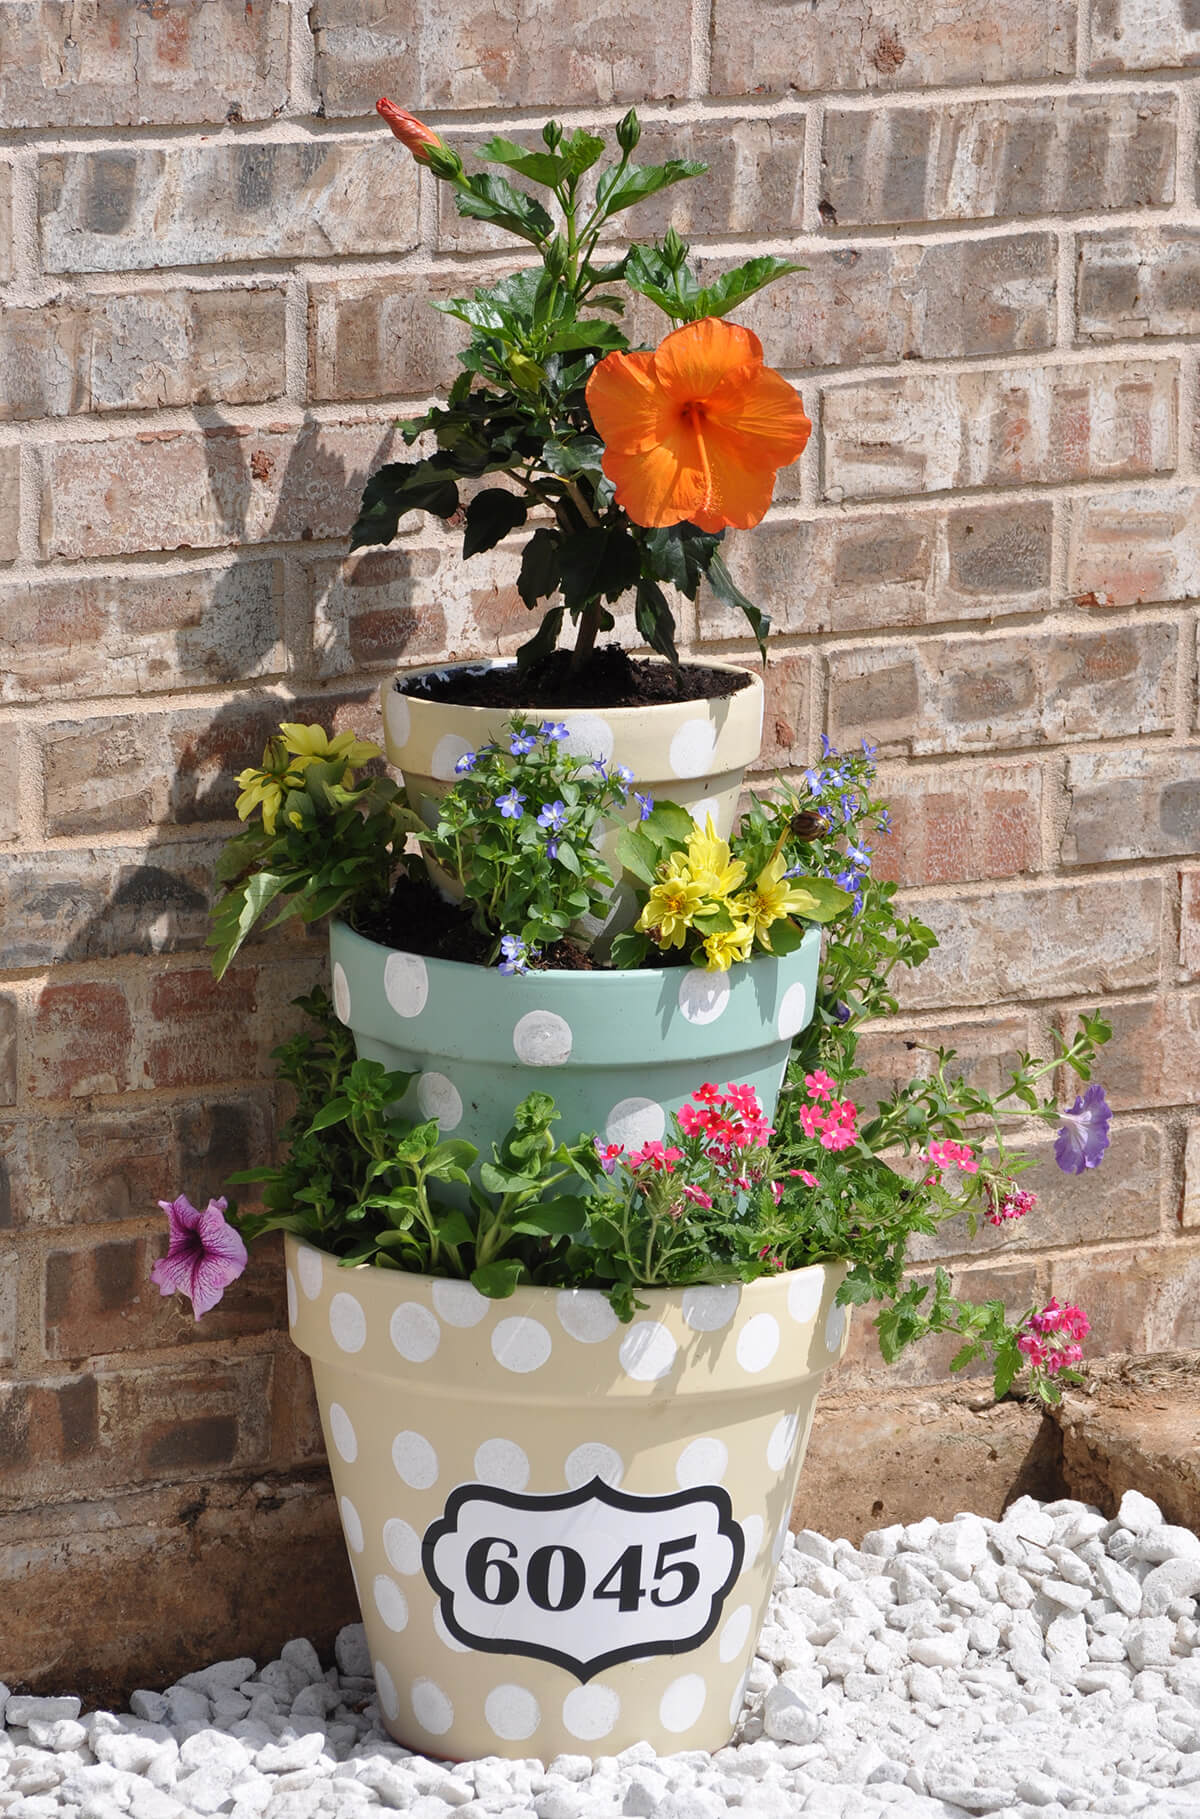 A Flower Pot Tower with Polka Dots